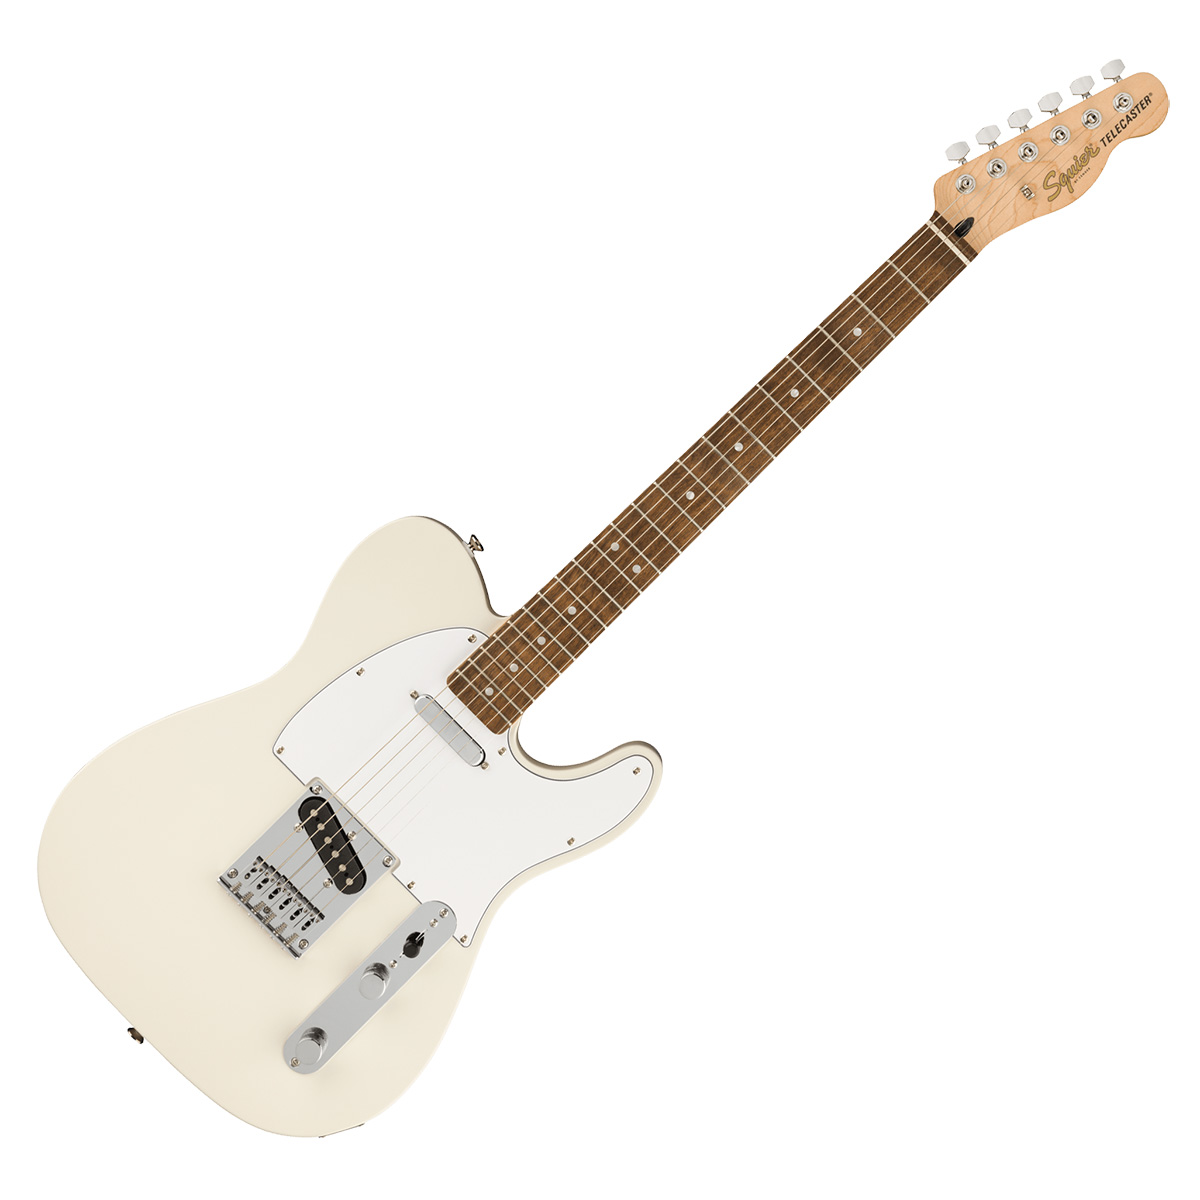 Squier by Fender Telecaster テレキャスター